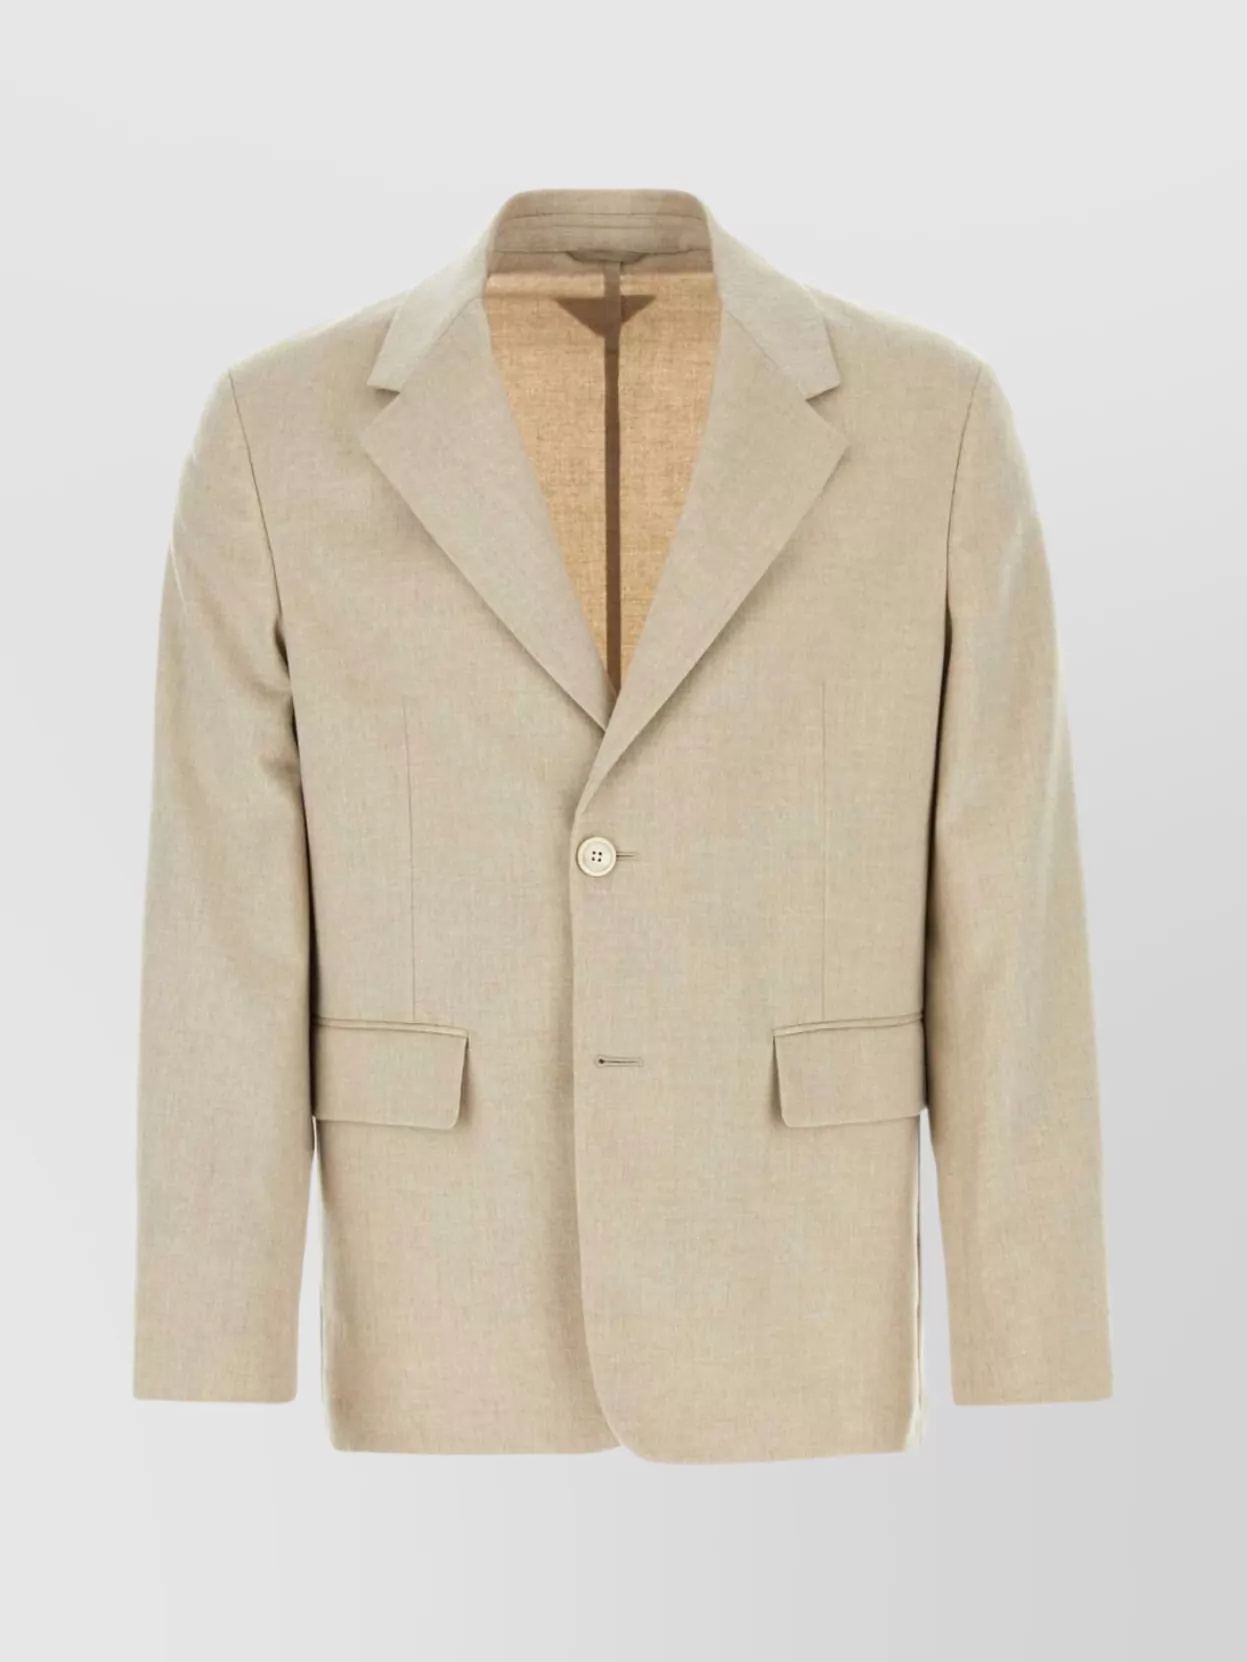 Shop Prada Cashmere Blazer With Notch Lapels And Back Vent For A Polished Look